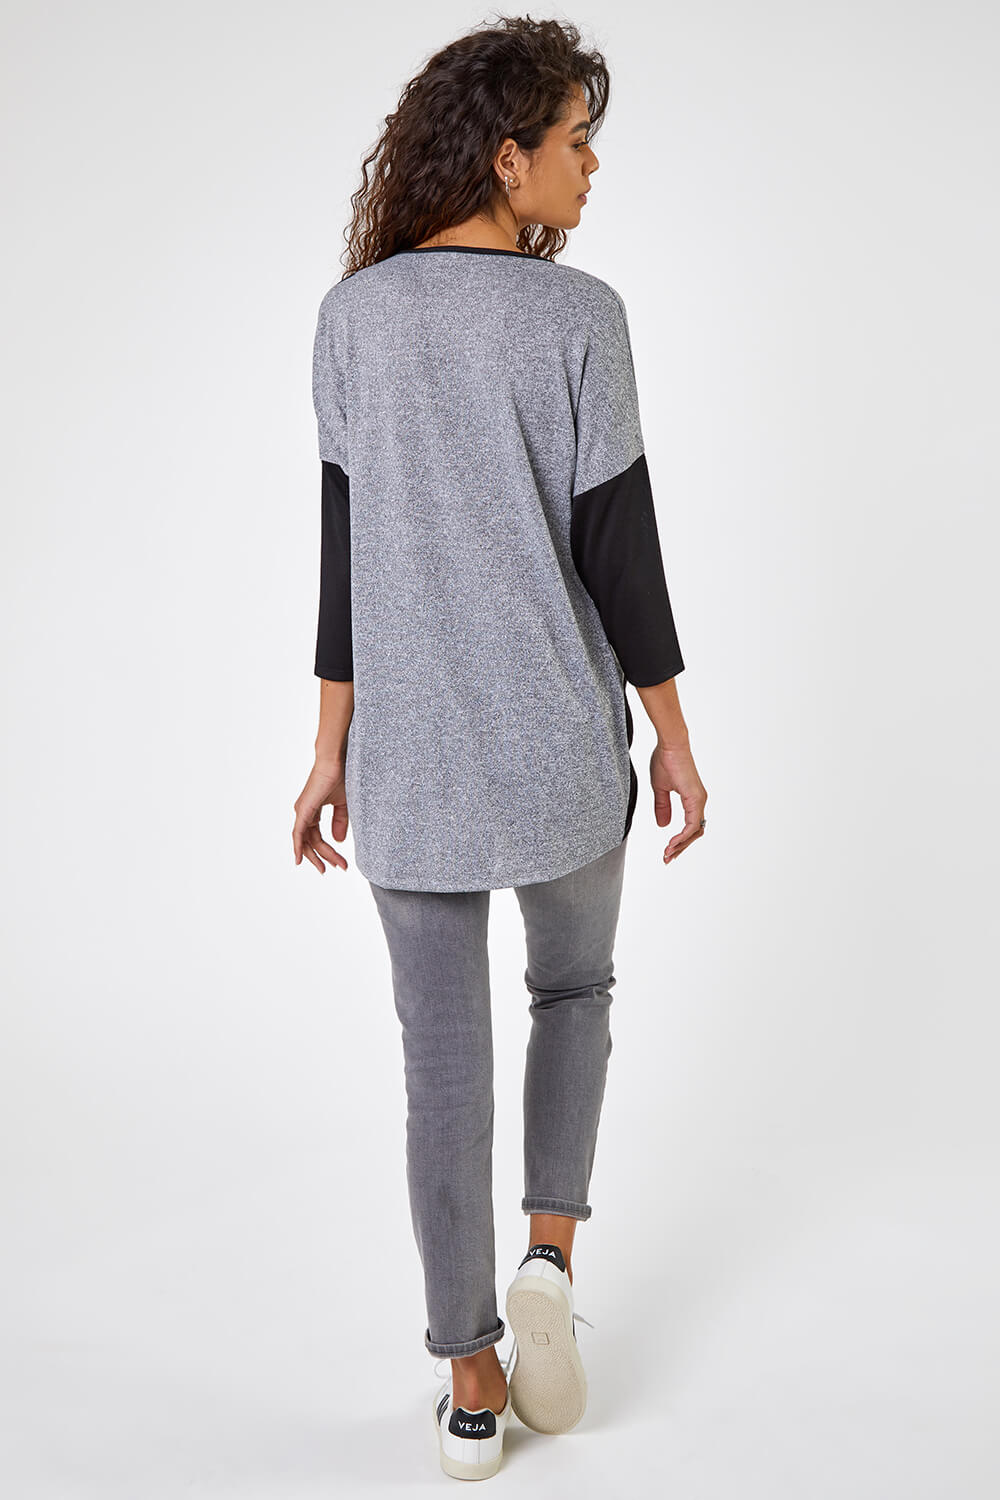 Grey Colour Block Graphic Print Tunic Top, Image 2 of 5